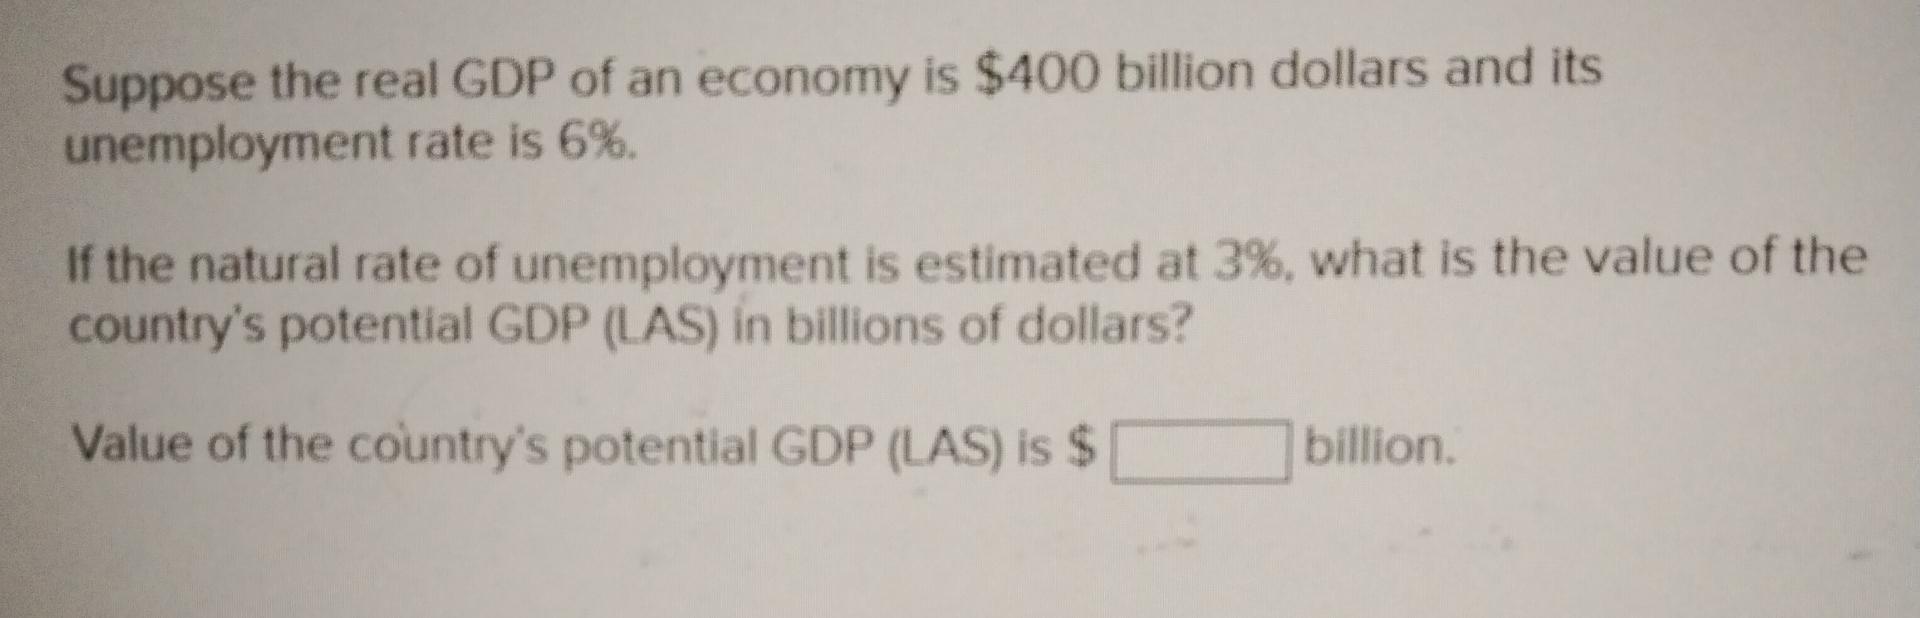 Solved Suppose the real GDP of an economy is $400 ﻿billion | Chegg.com